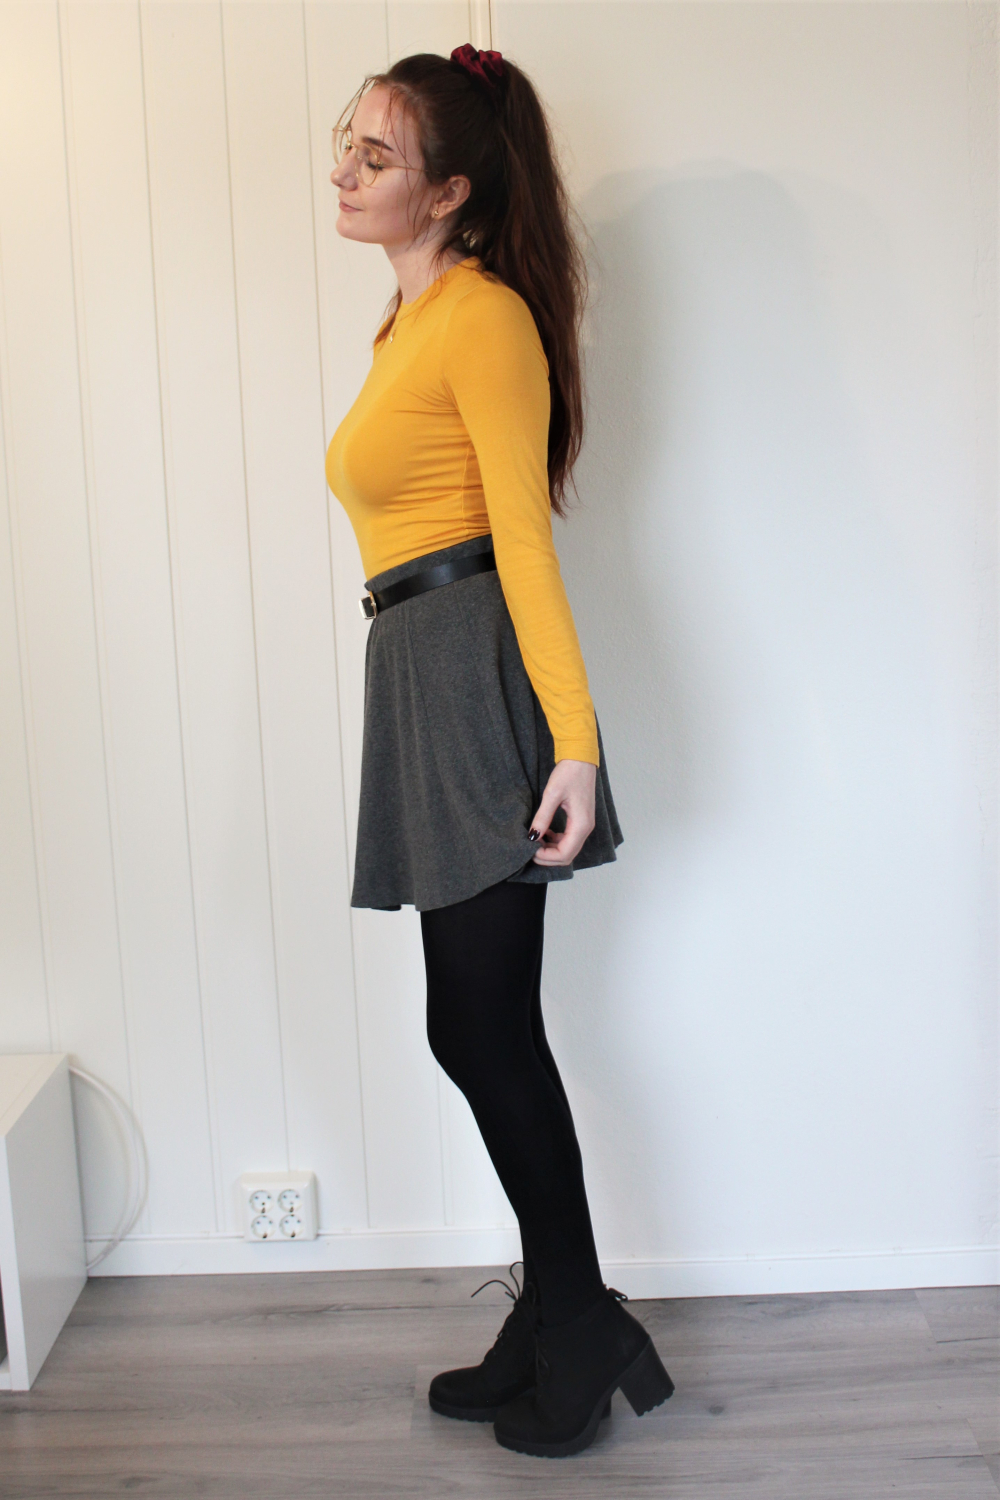 Mustard yellow outfit for school